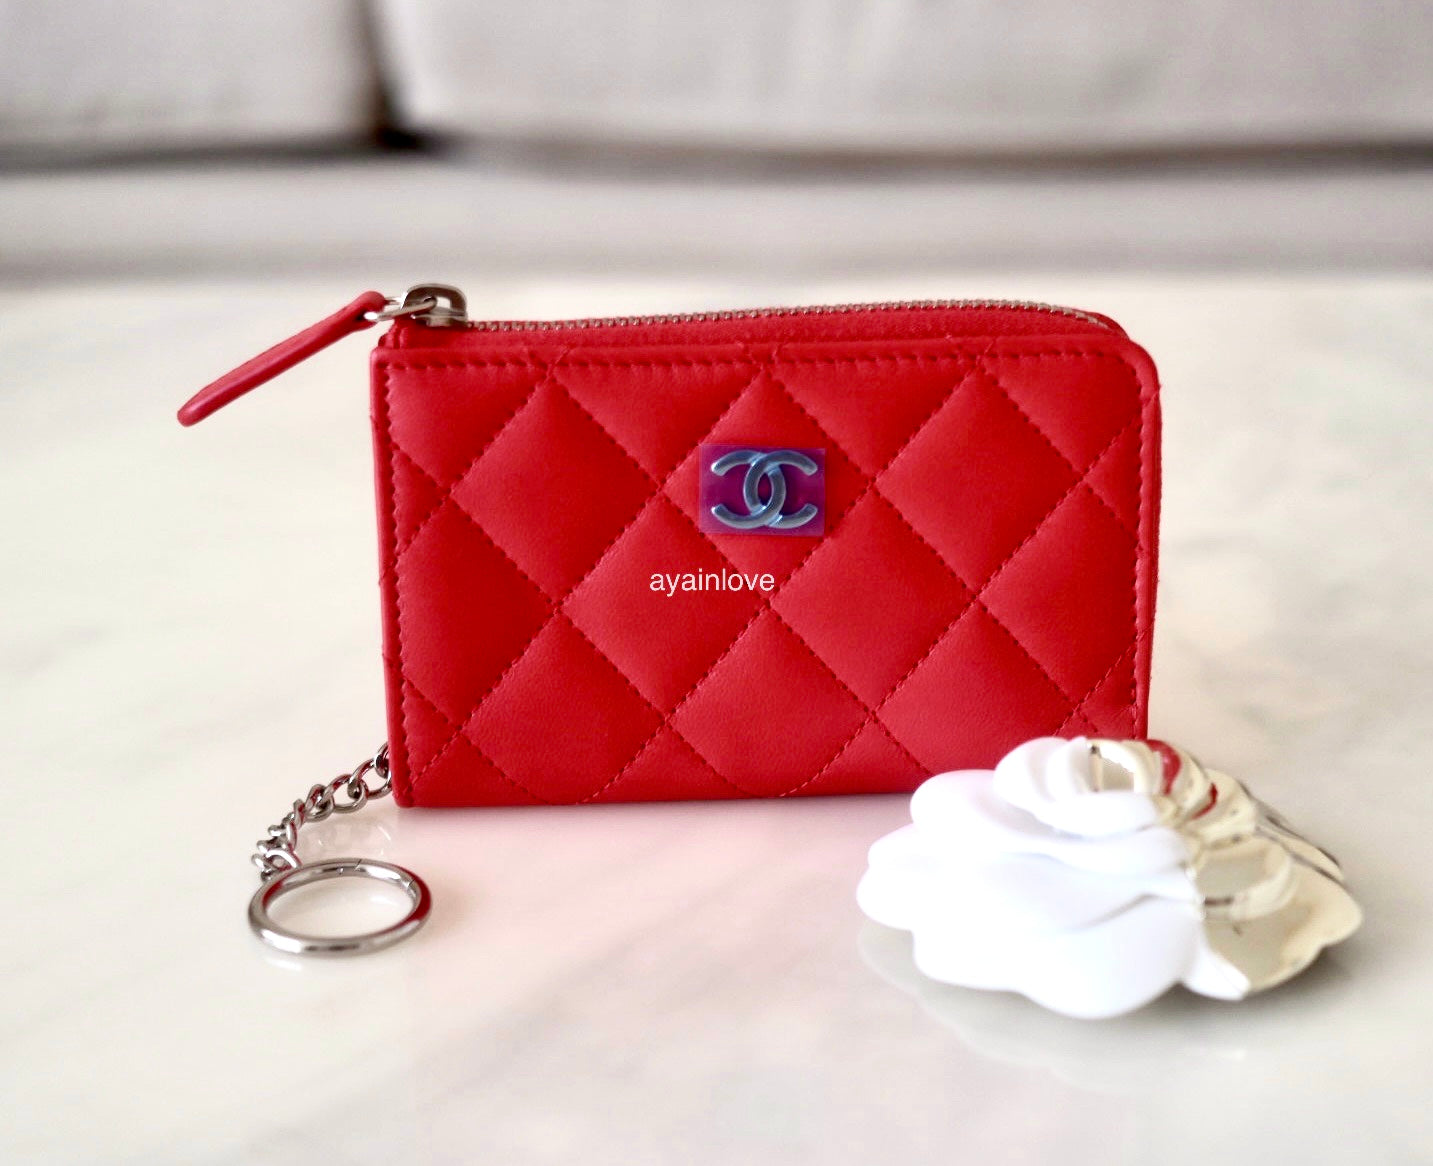 CHANEL, Bags, Chanel 9 Zipper Coin And Card Holder